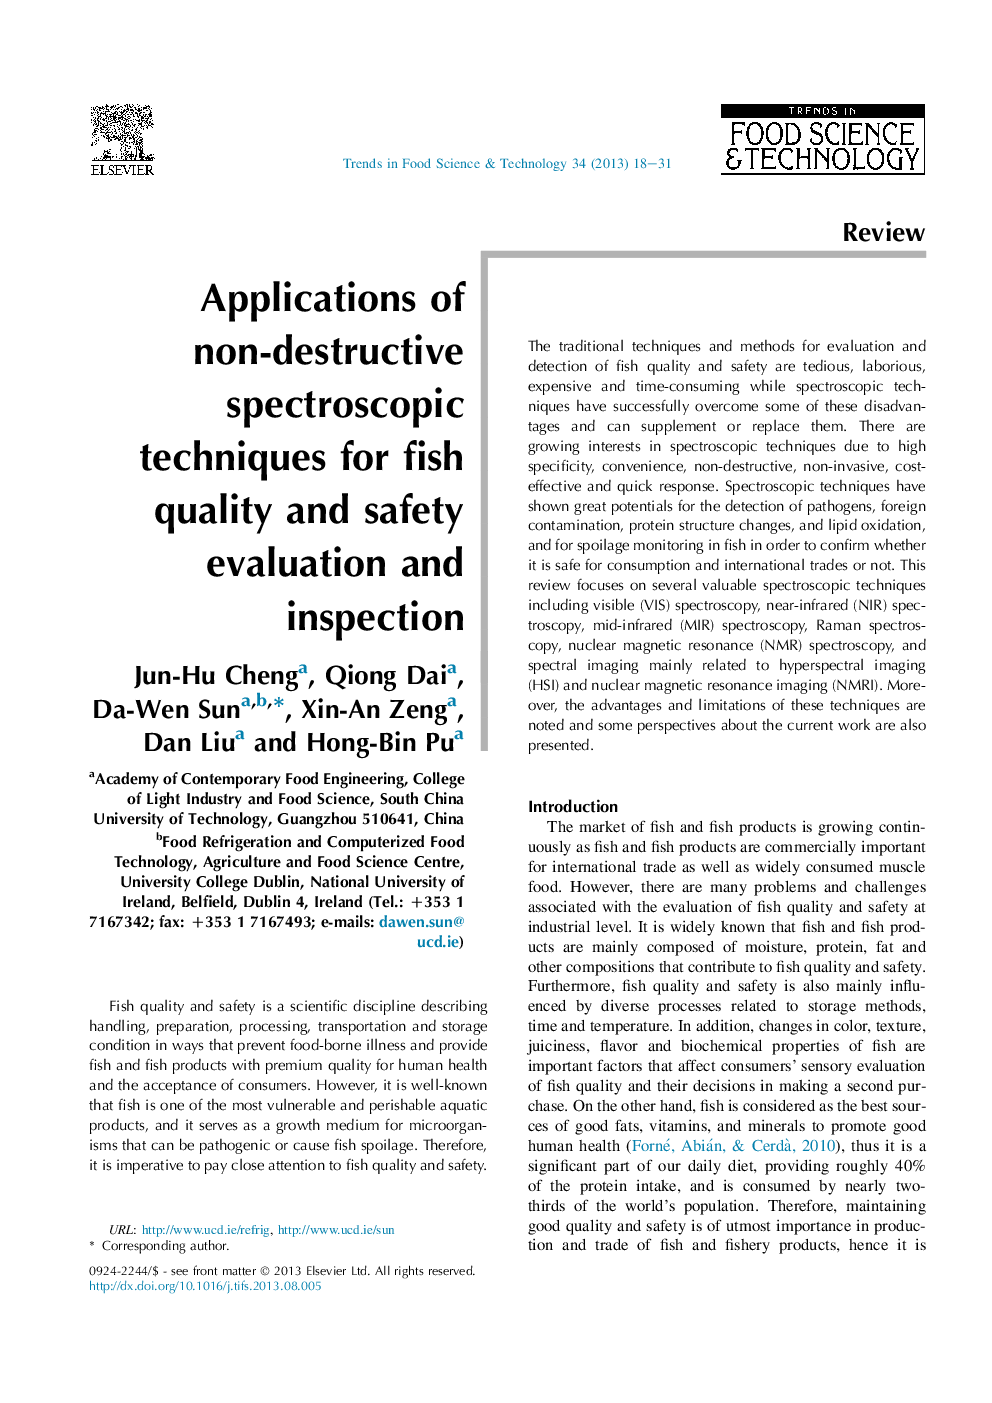 Applications of non-destructive spectroscopic techniques for fish quality and safety evaluation and inspection